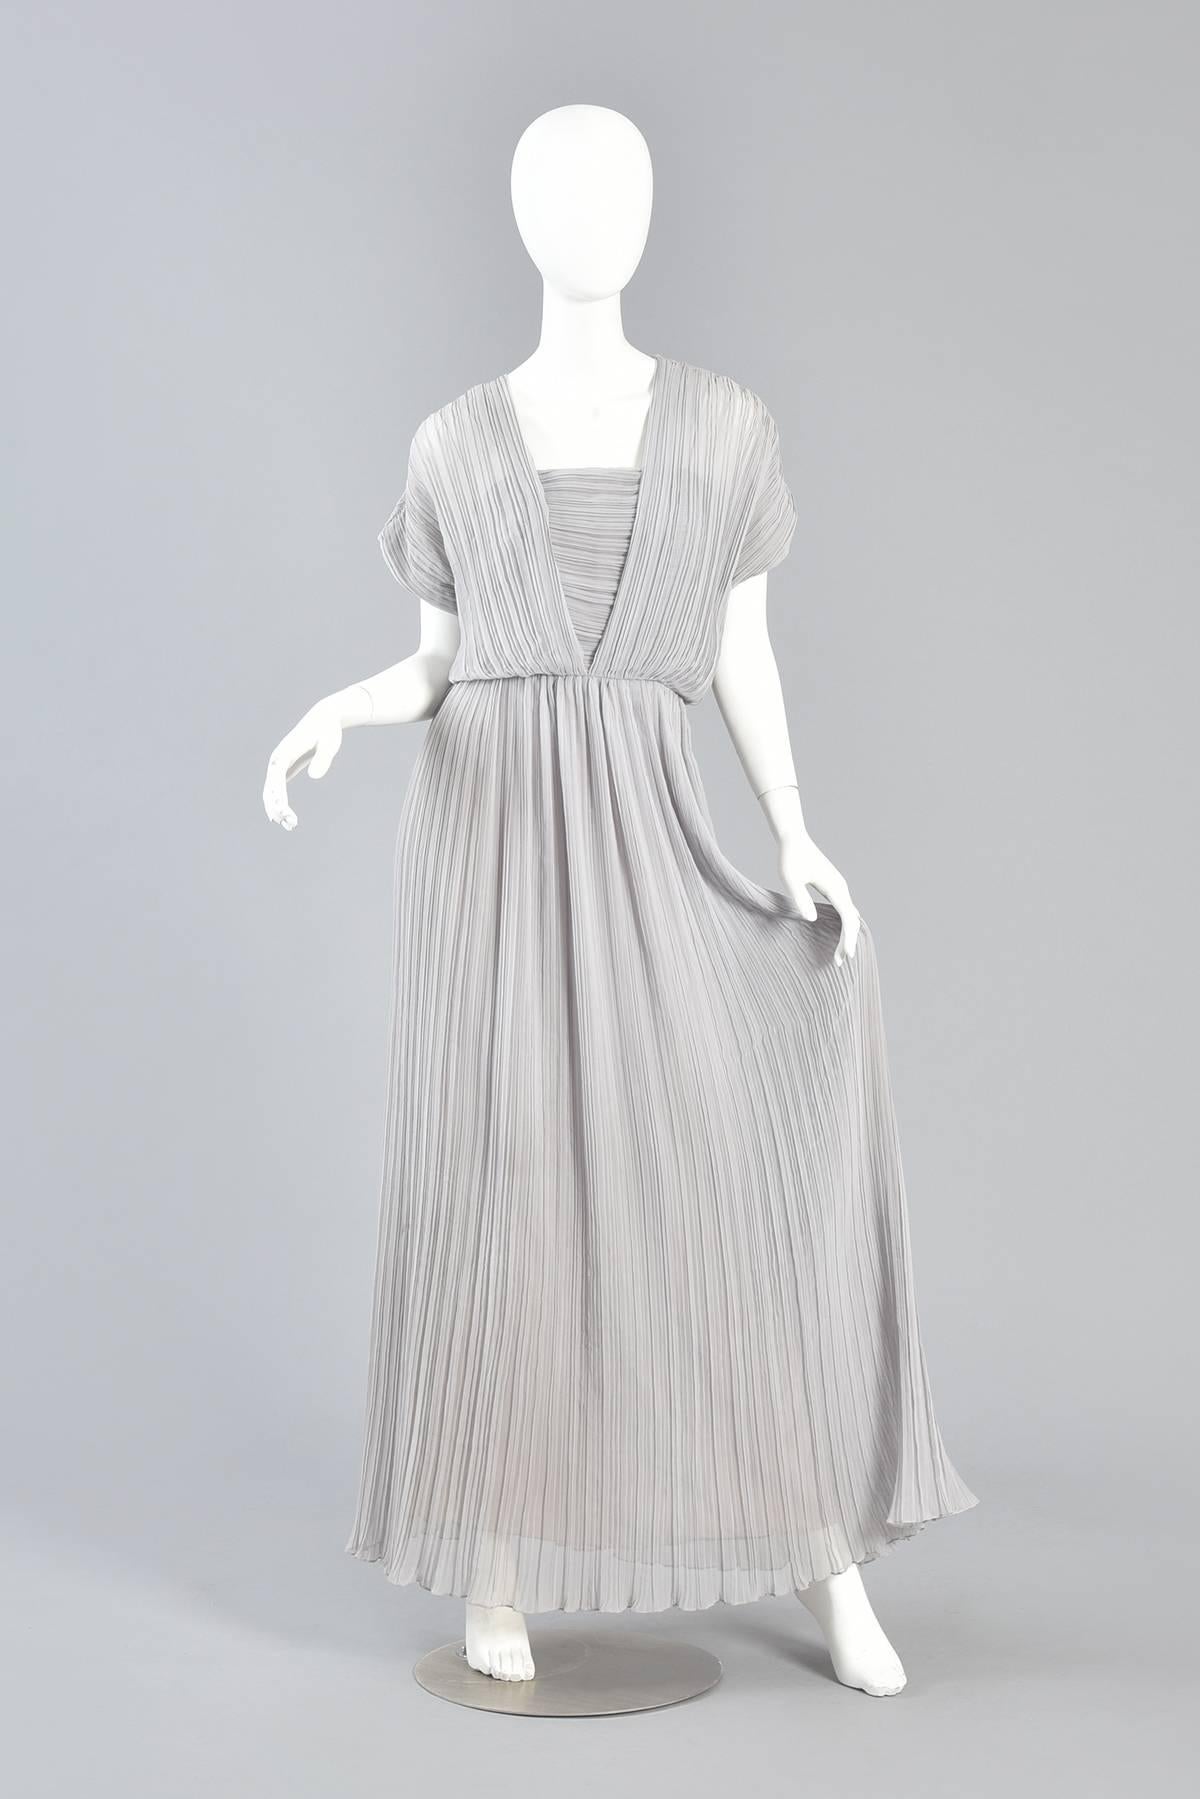 Victor Costa Dove Grey Grecian Pleated Evening Gown

Bustown Modern is so pleased to offer this beautiful 1970s/early 80s dove grey Grecian pleated gown by Victor Costa.

Gown features sheer crinkle pleated skirt with draped top and fitted